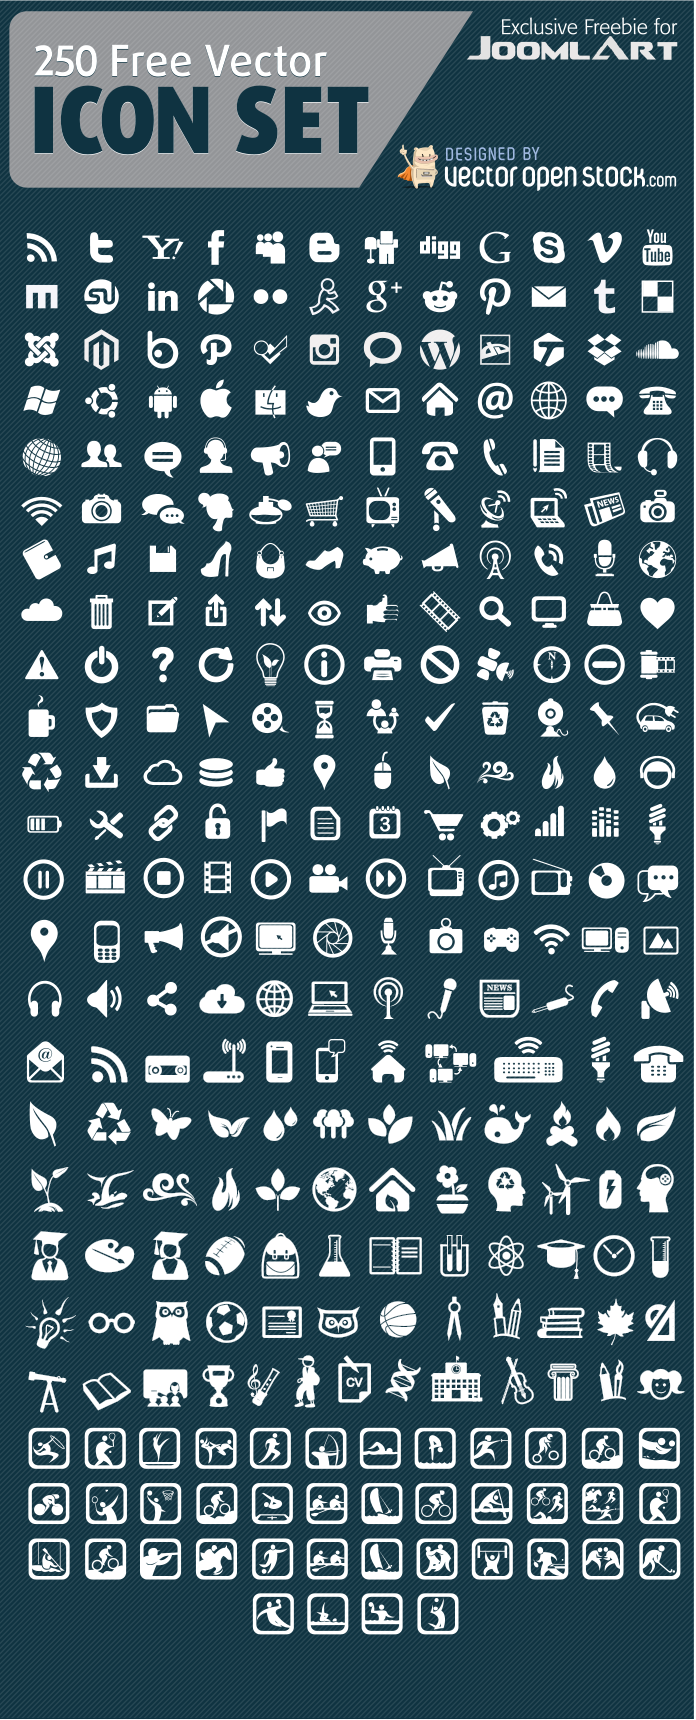 Preview of the Freebie 250 vector icons set from Vector Open Stock